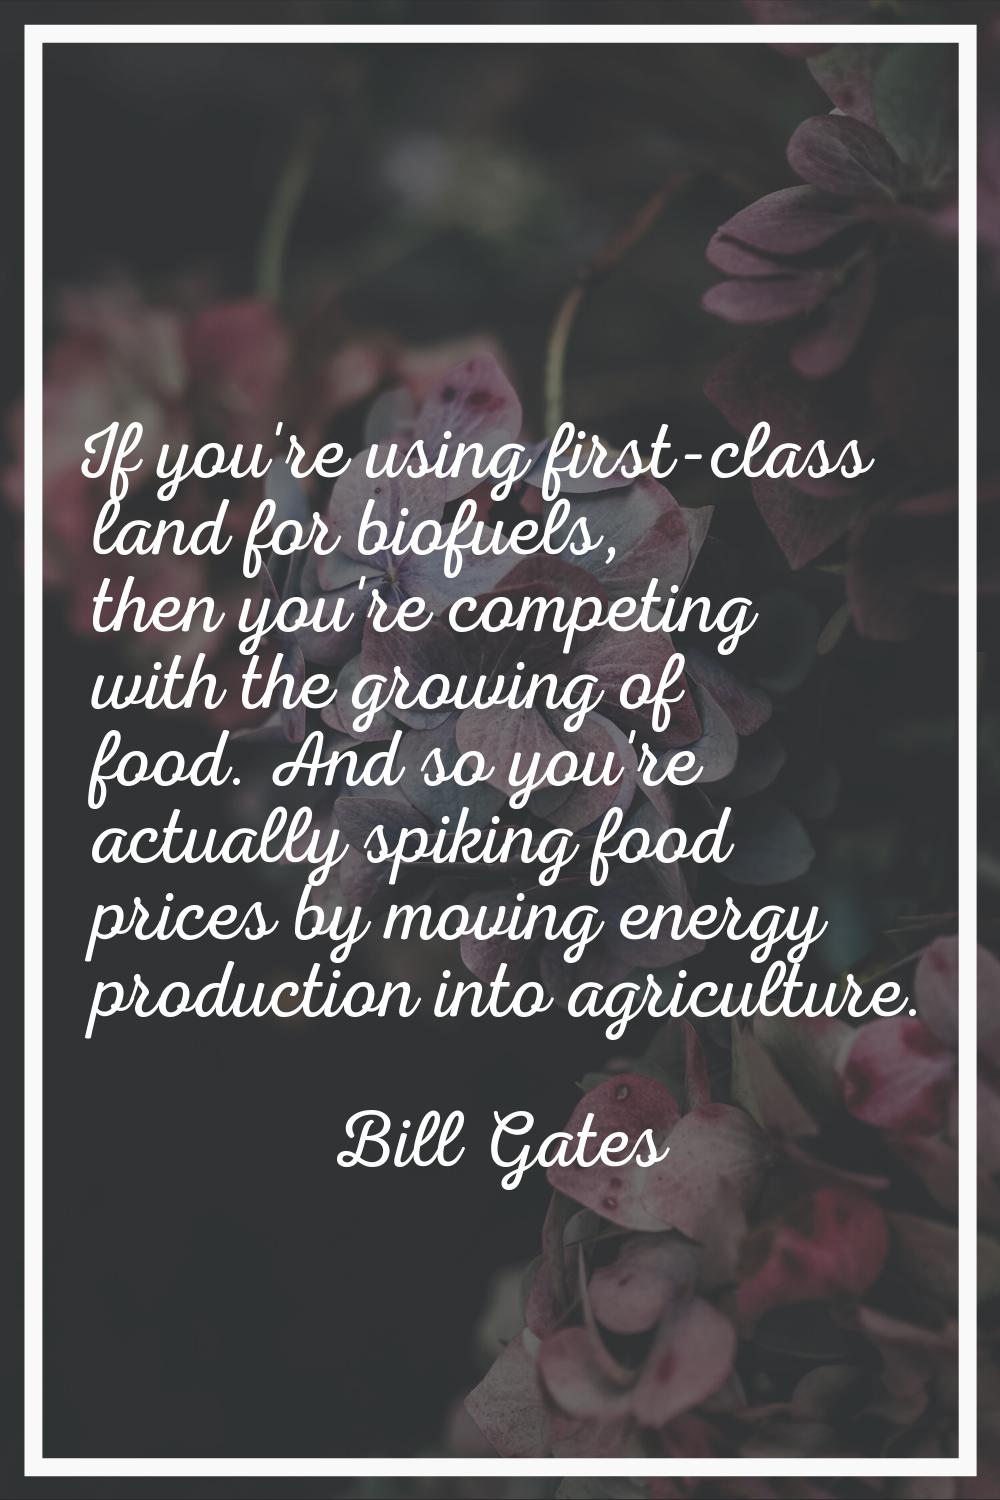 If you're using first-class land for biofuels, then you're competing with the growing of food. And 